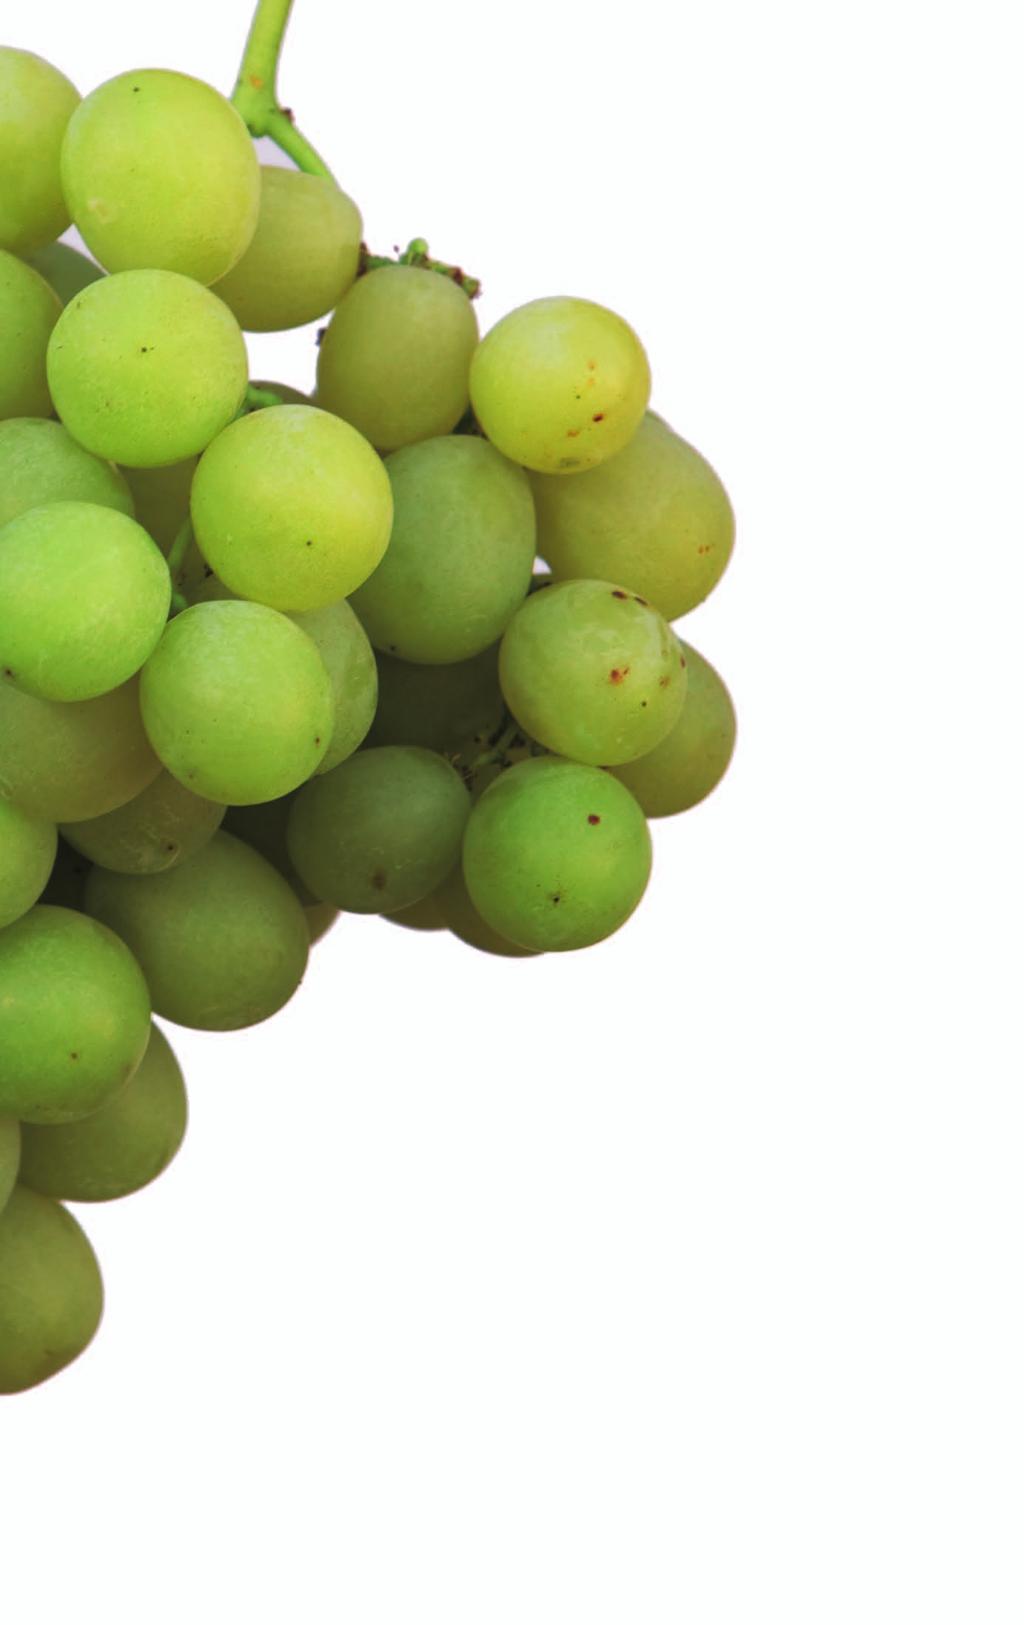 What was the aim The aim of the project is to produce high quality table grapes by applying a crop protection programme that optimises the use of plant protection products according to Integrated